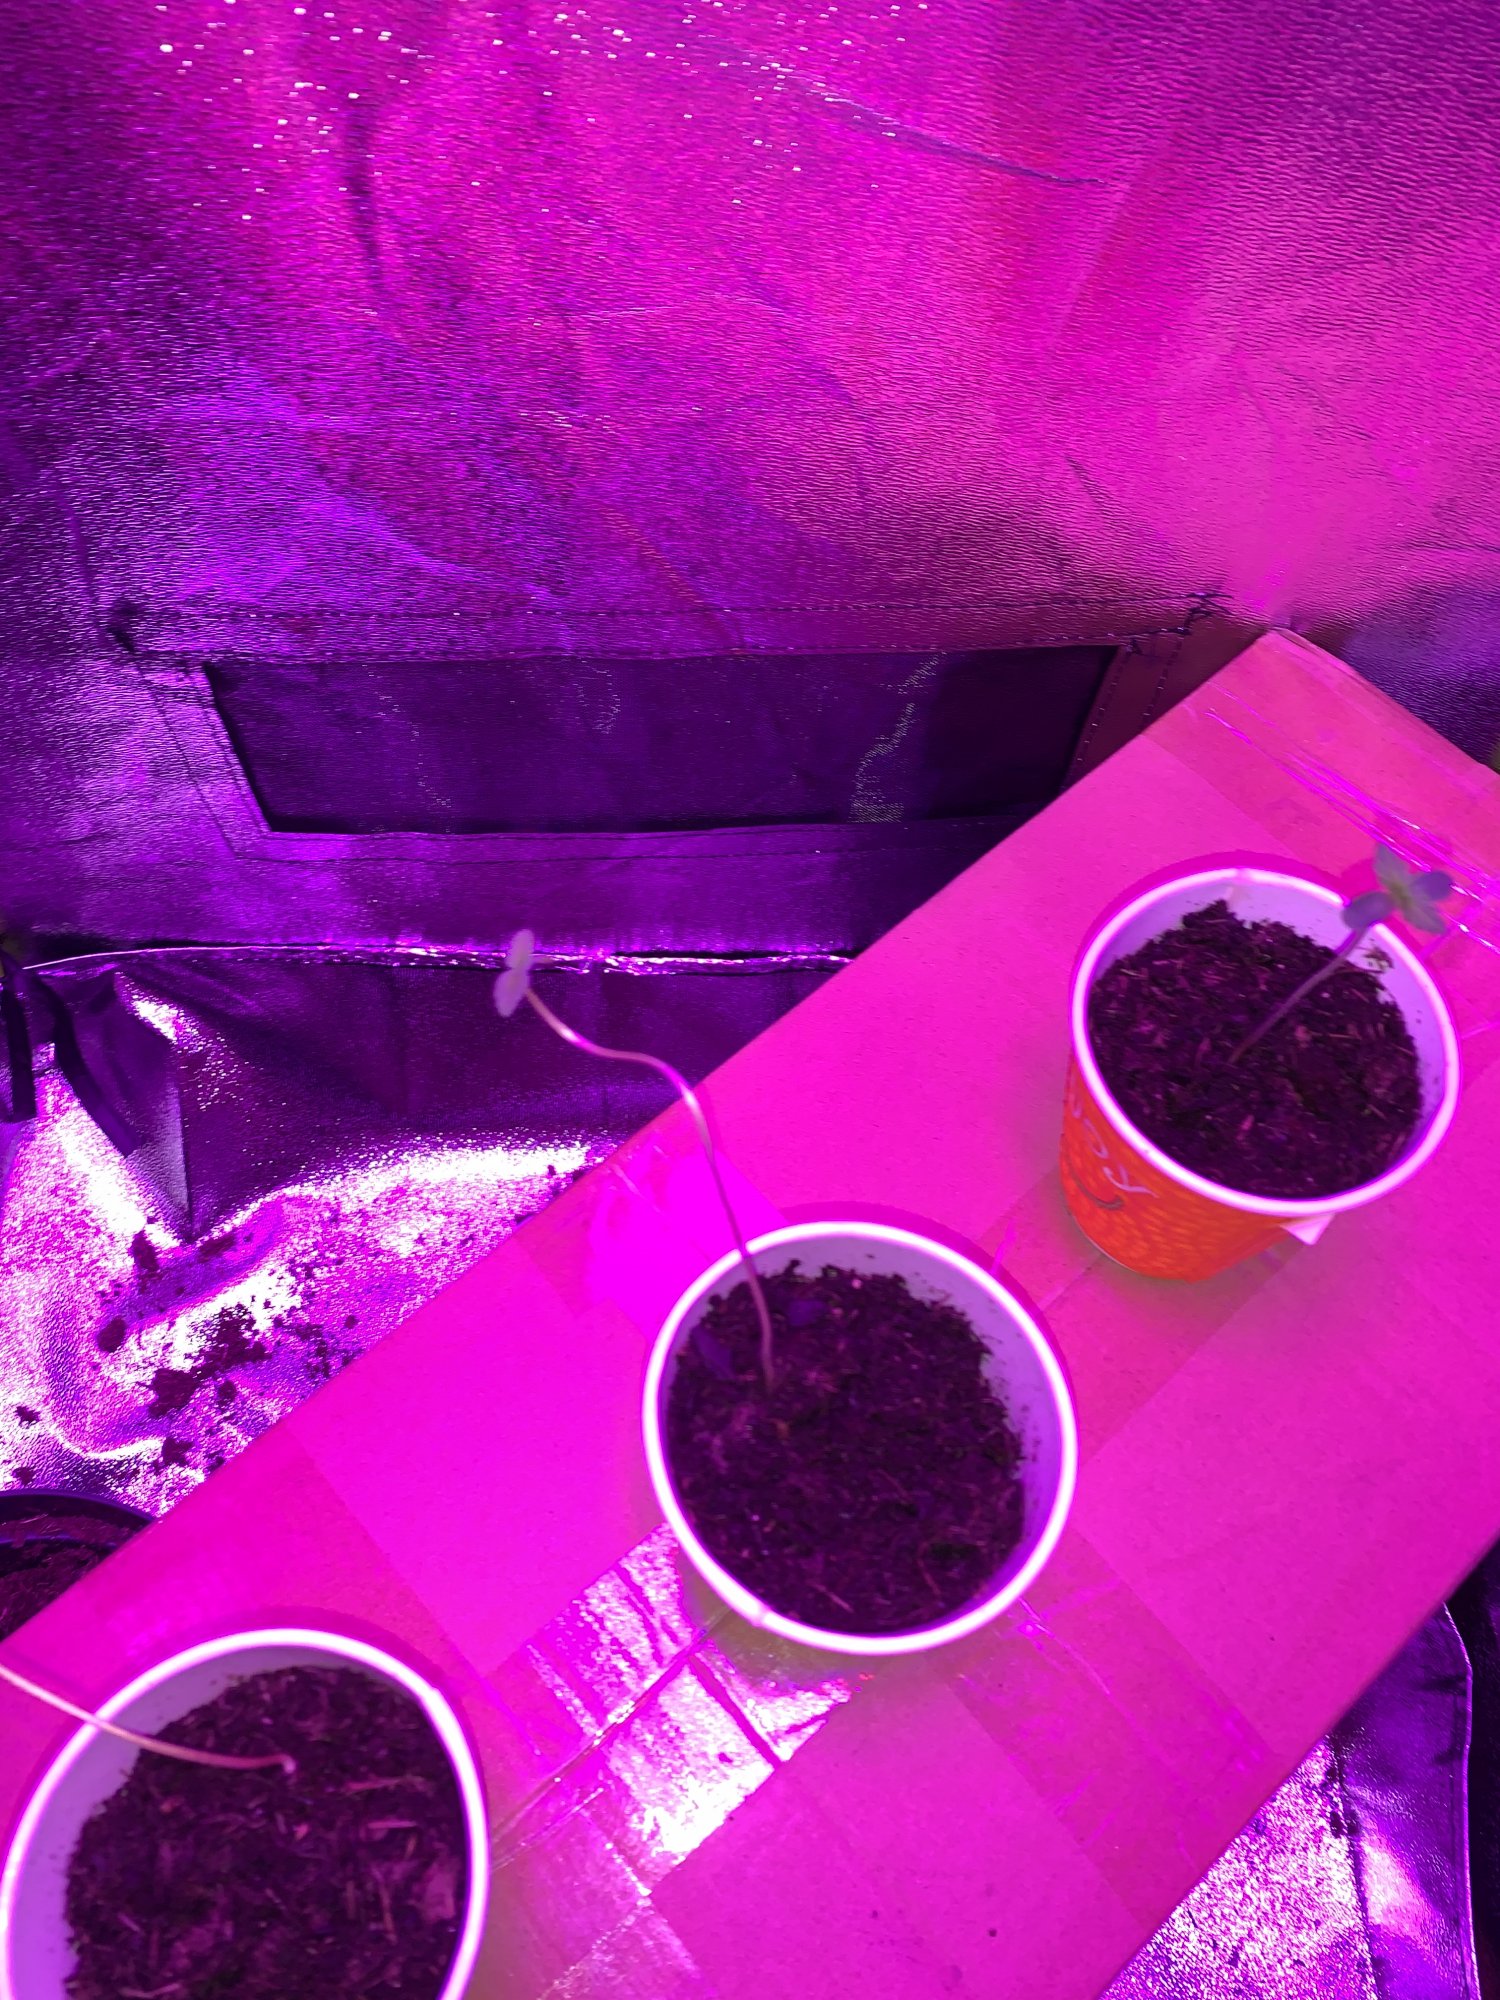 First timer growing 3 plants 4